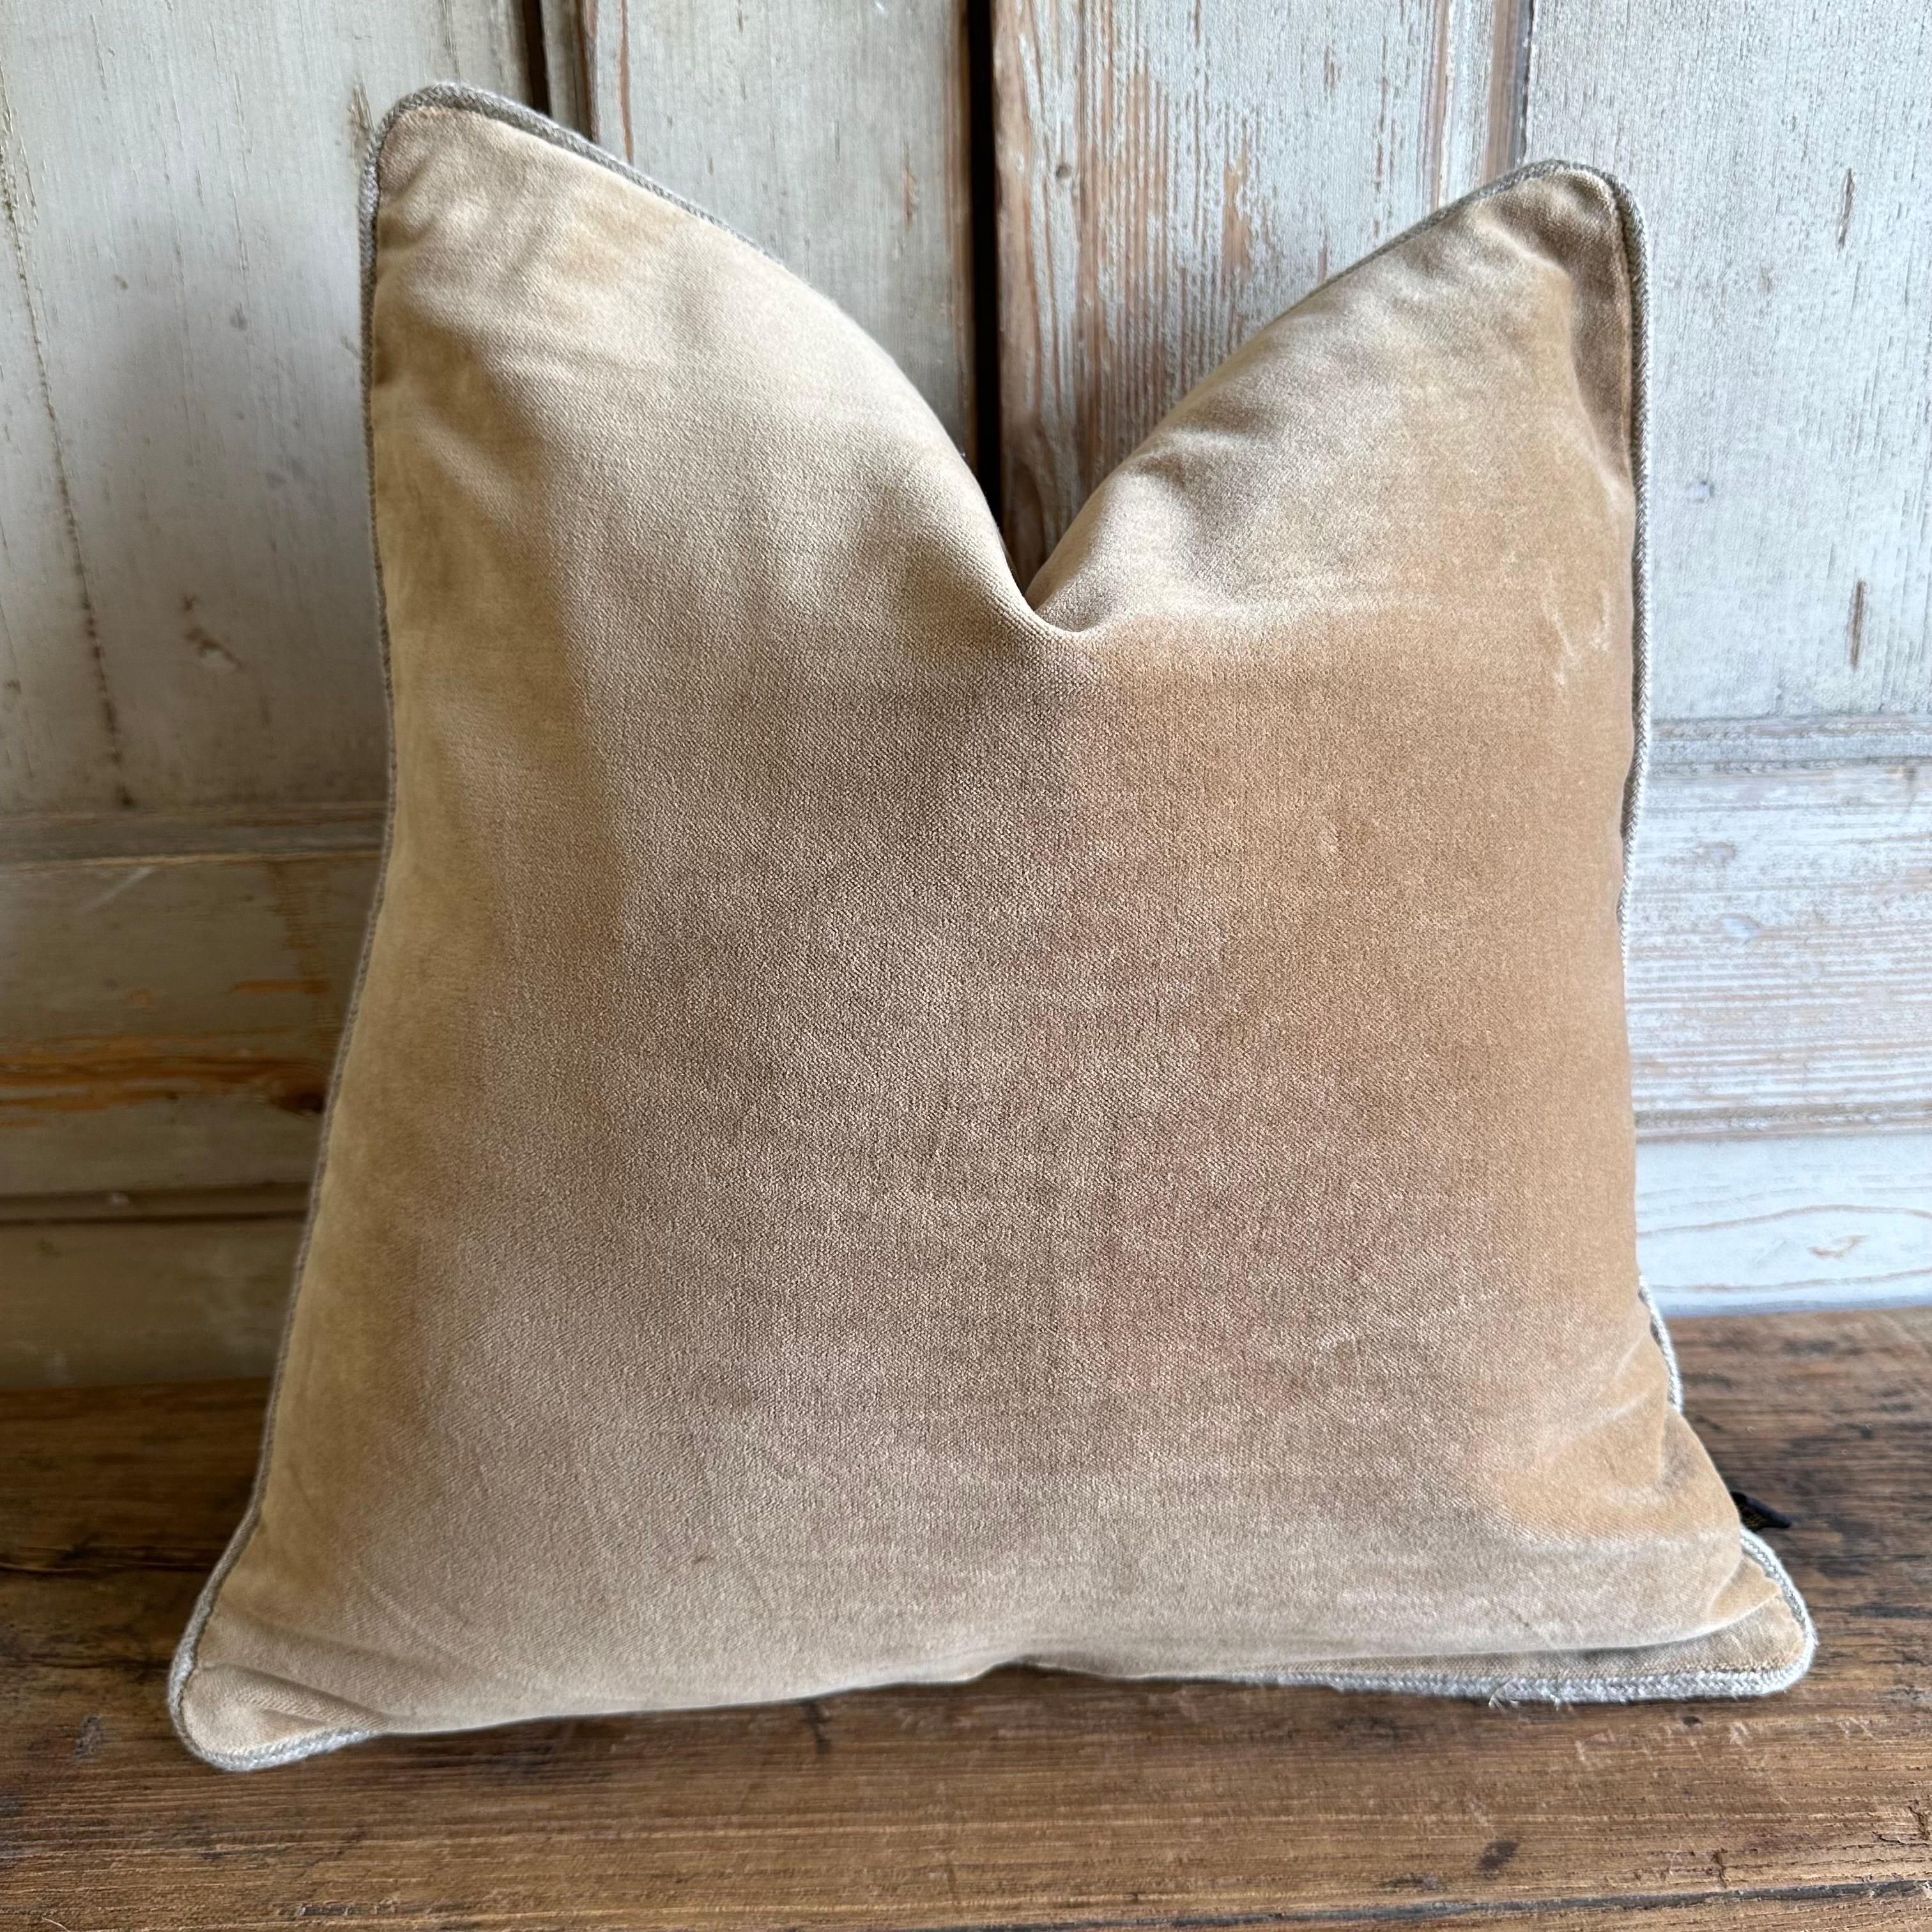 French cotton velvet lumbar pillow with jute trim. Zipper closure, 90/10 down feather insert pillow is included.
size: 18x18
Color: Tabac, a soft velvety nude tone with warm beige tones
100% Cotton velvet
Linen bourdon finish